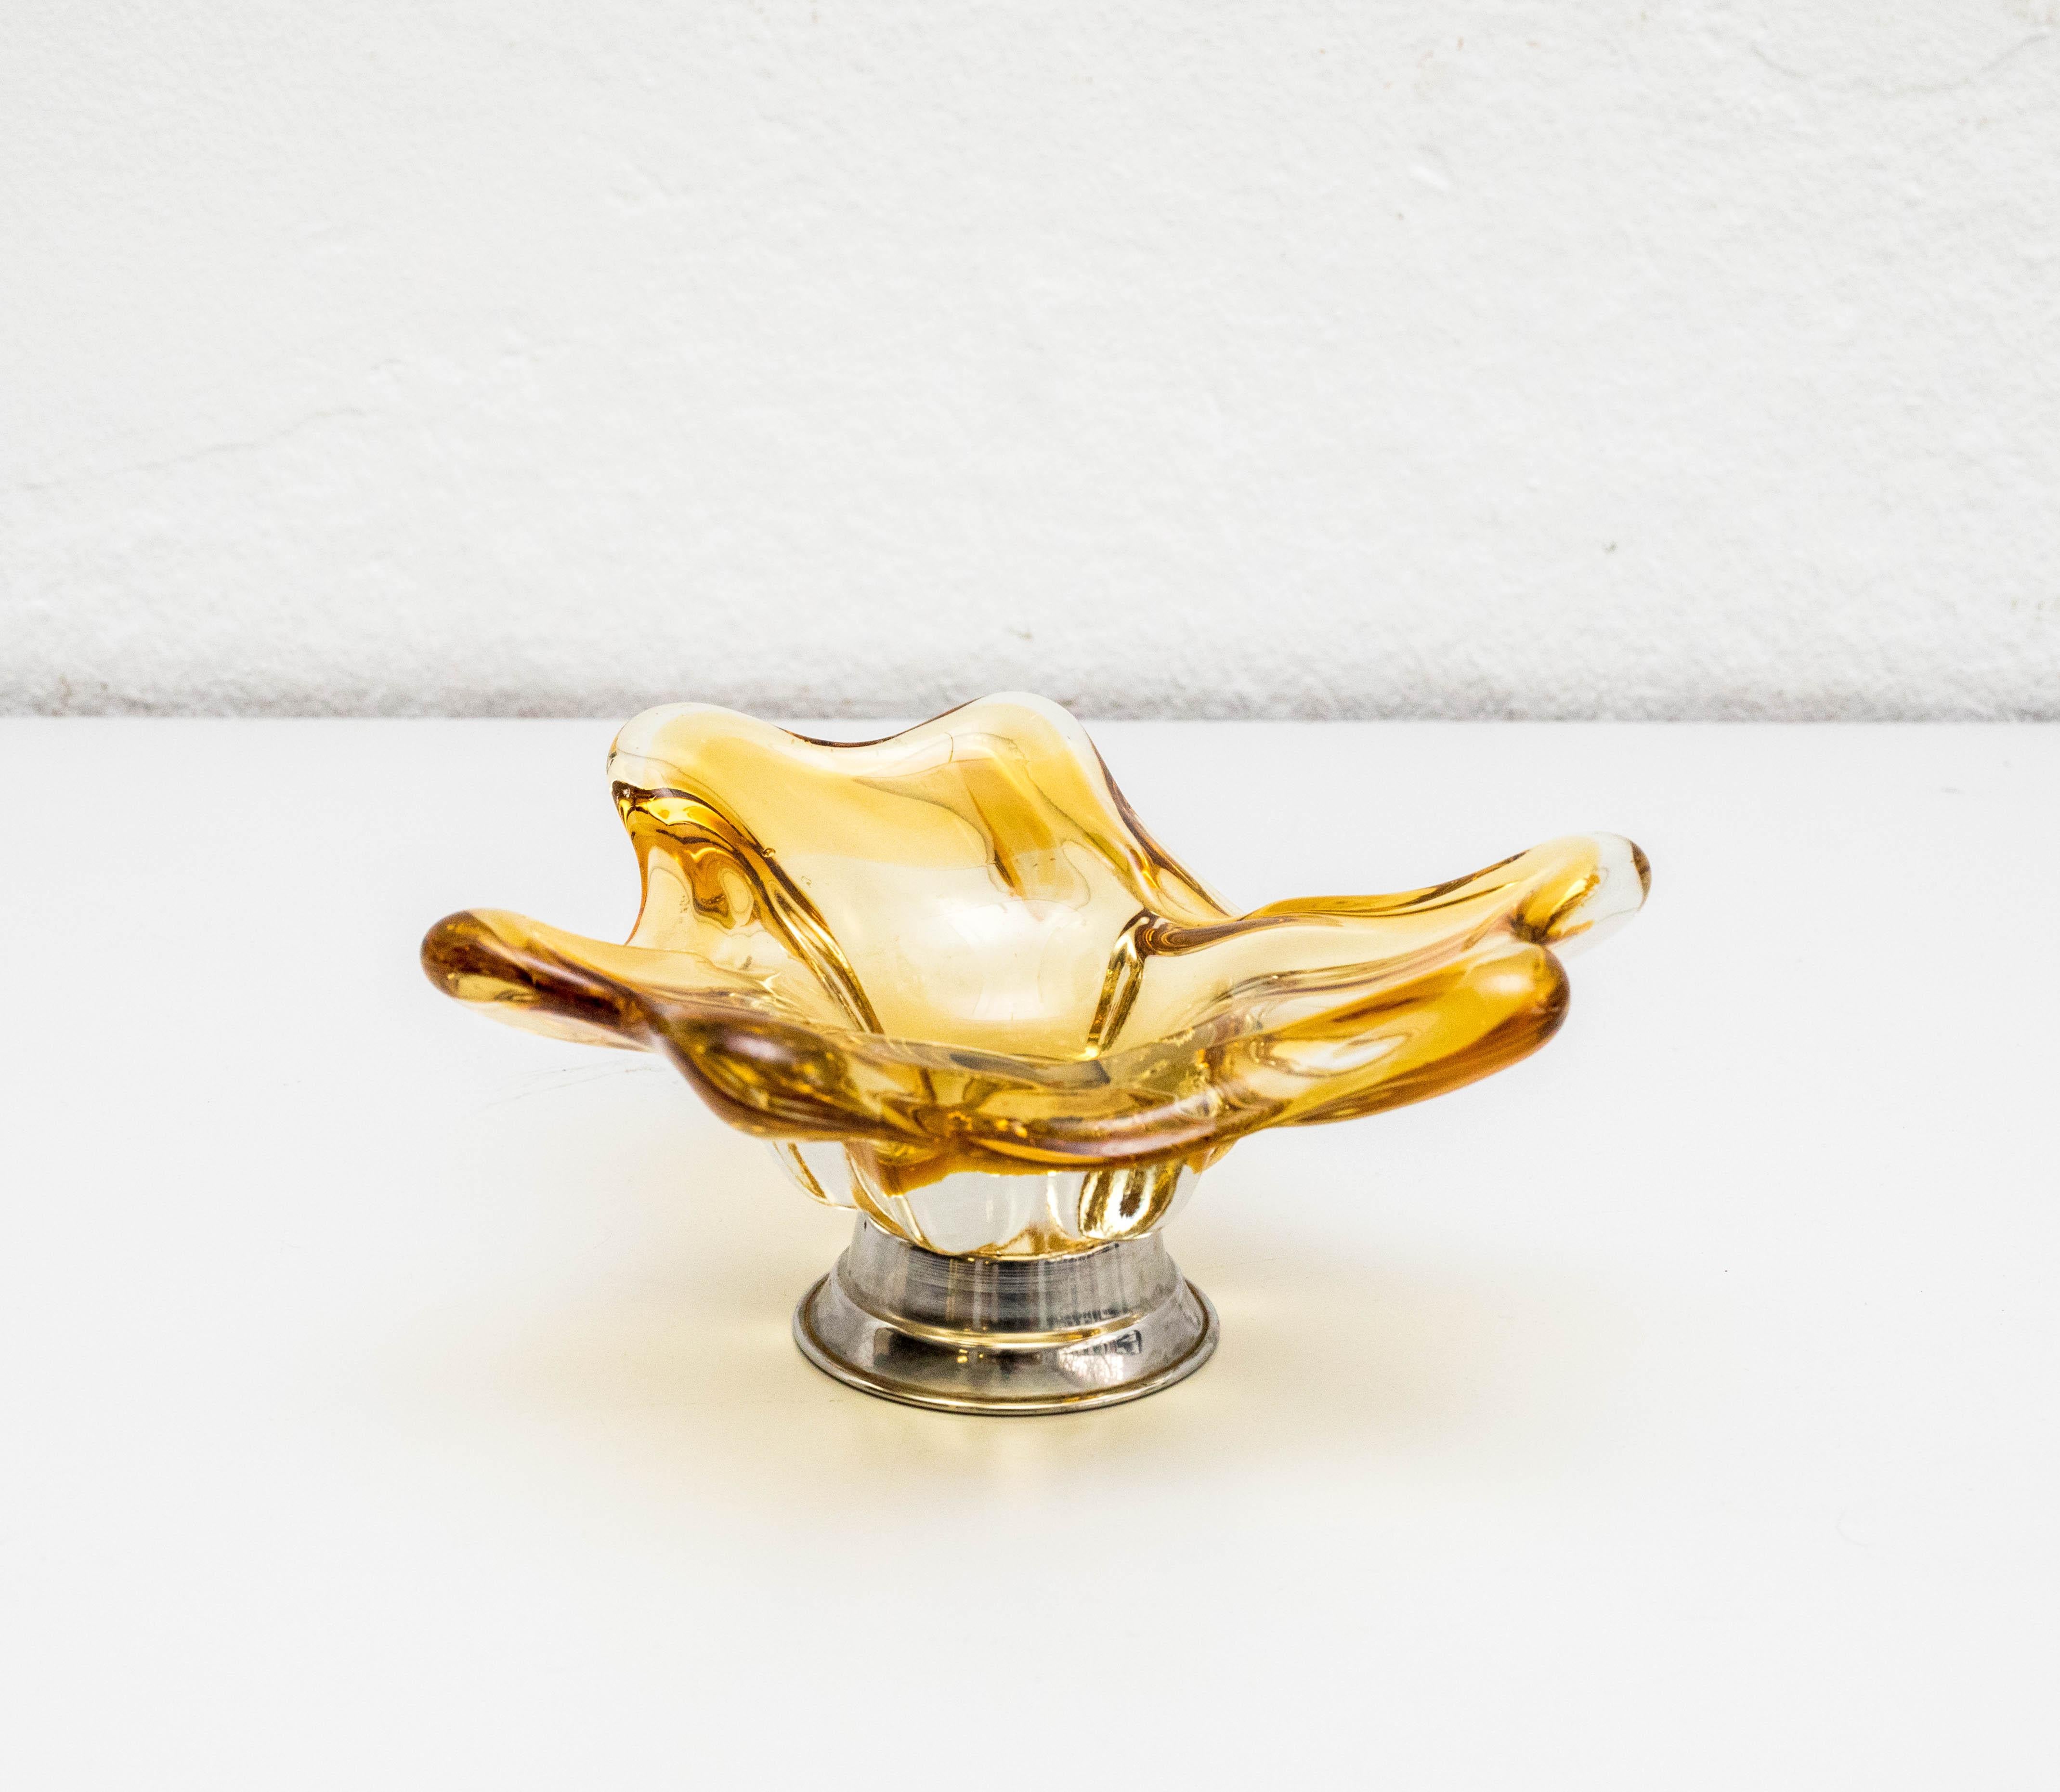 Yellow murano glass ashtray, circa 1970
Manufactured in Italy.

In original condition, with minor wear consistent of age and use, preserving a beautiful patina.